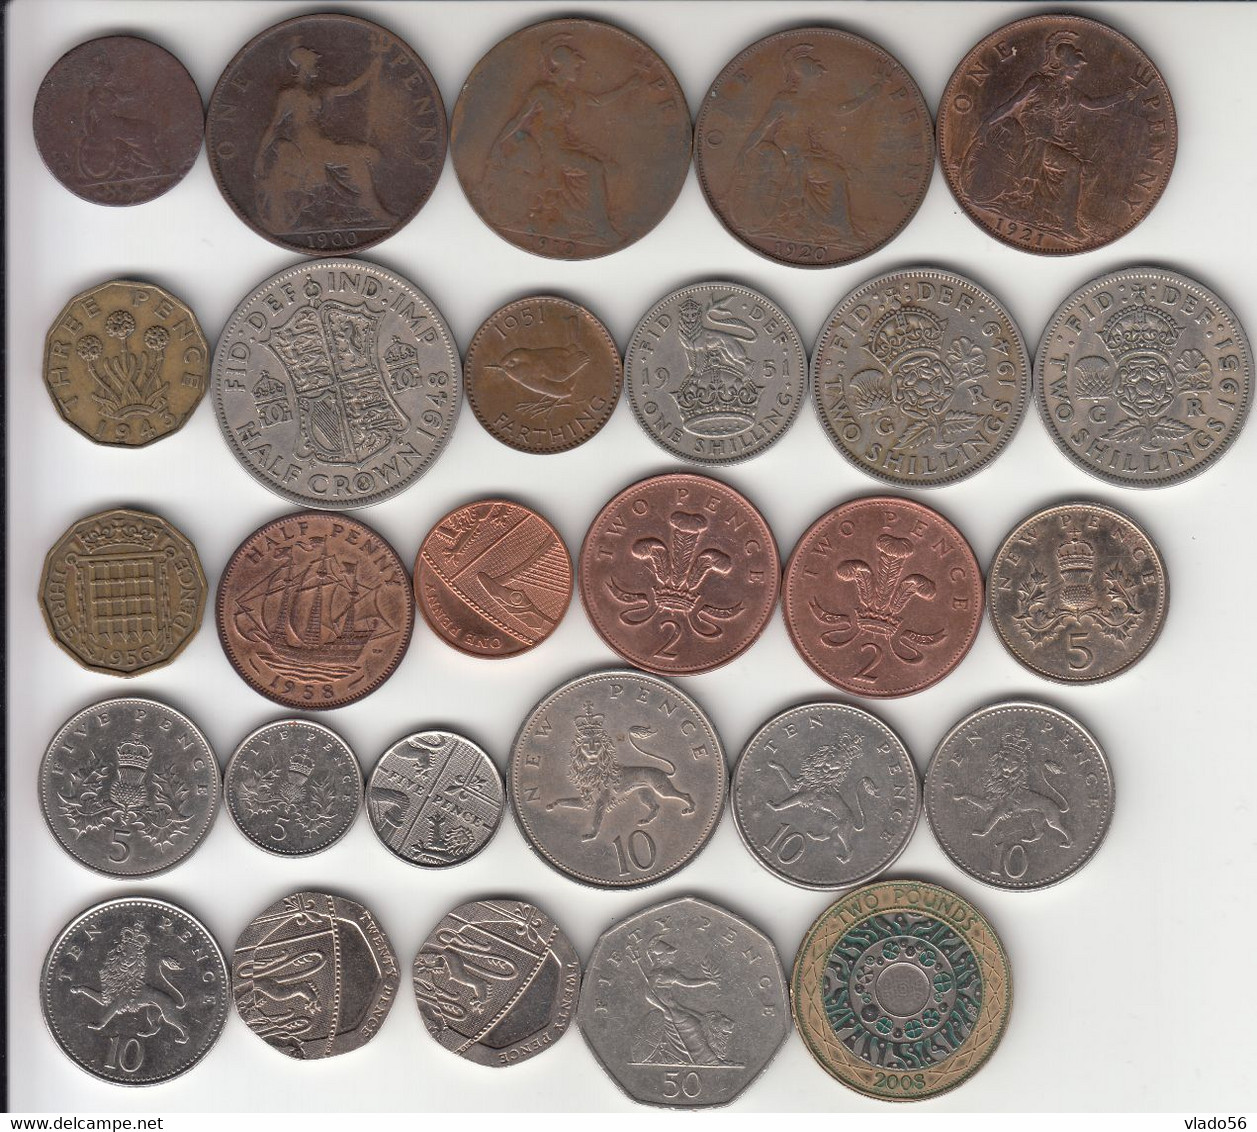 GREAT BRITAIN  - LOT 27 DIFFERENT COINS FROM  1 FARTHING 1847 UP TO  2 POUNDS 2008 ,  LM1.23 - Collezioni